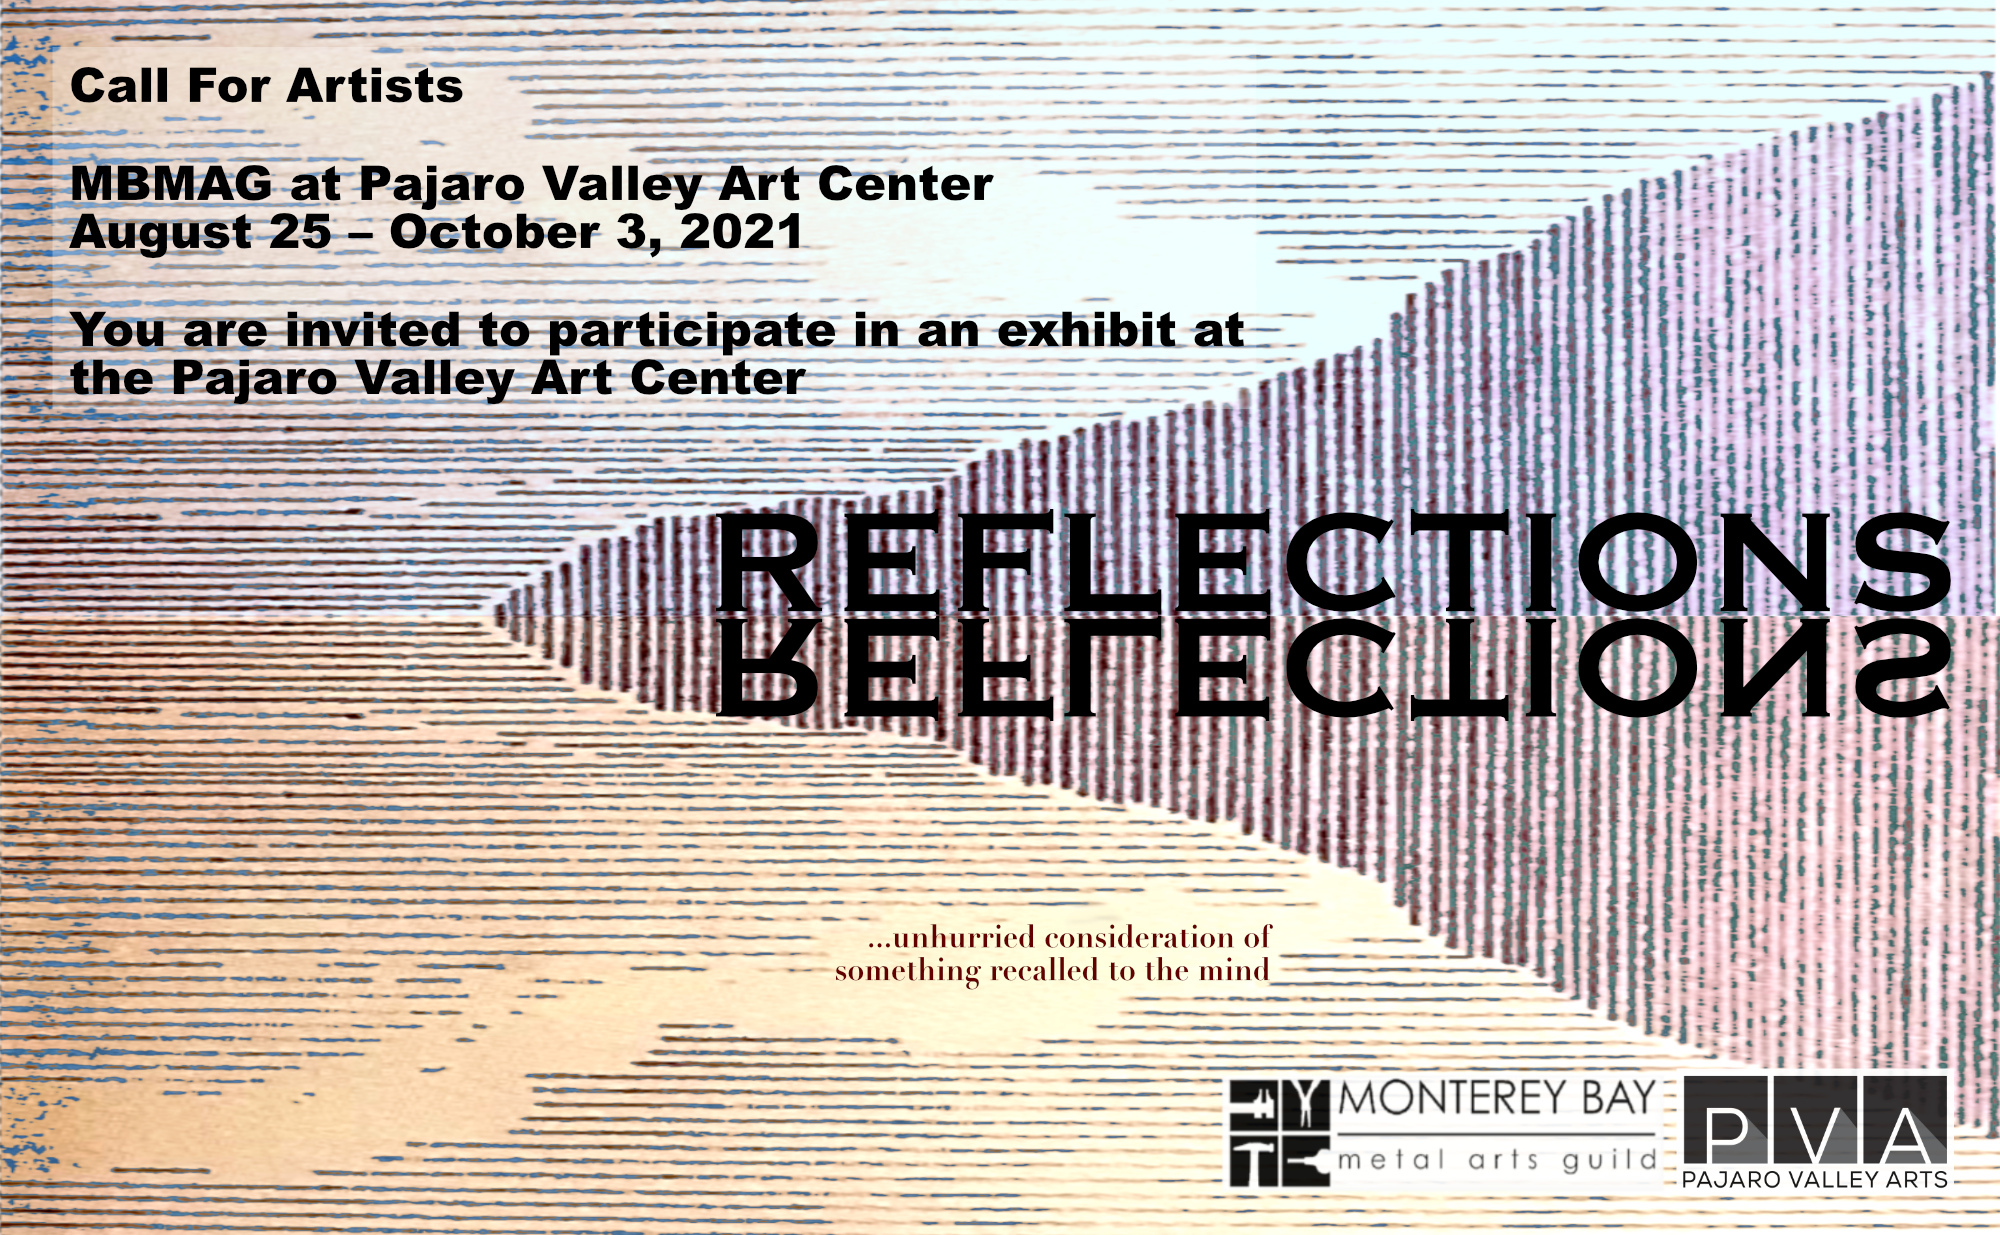 Call for Artists: “Reflections” Exhibition & Sale